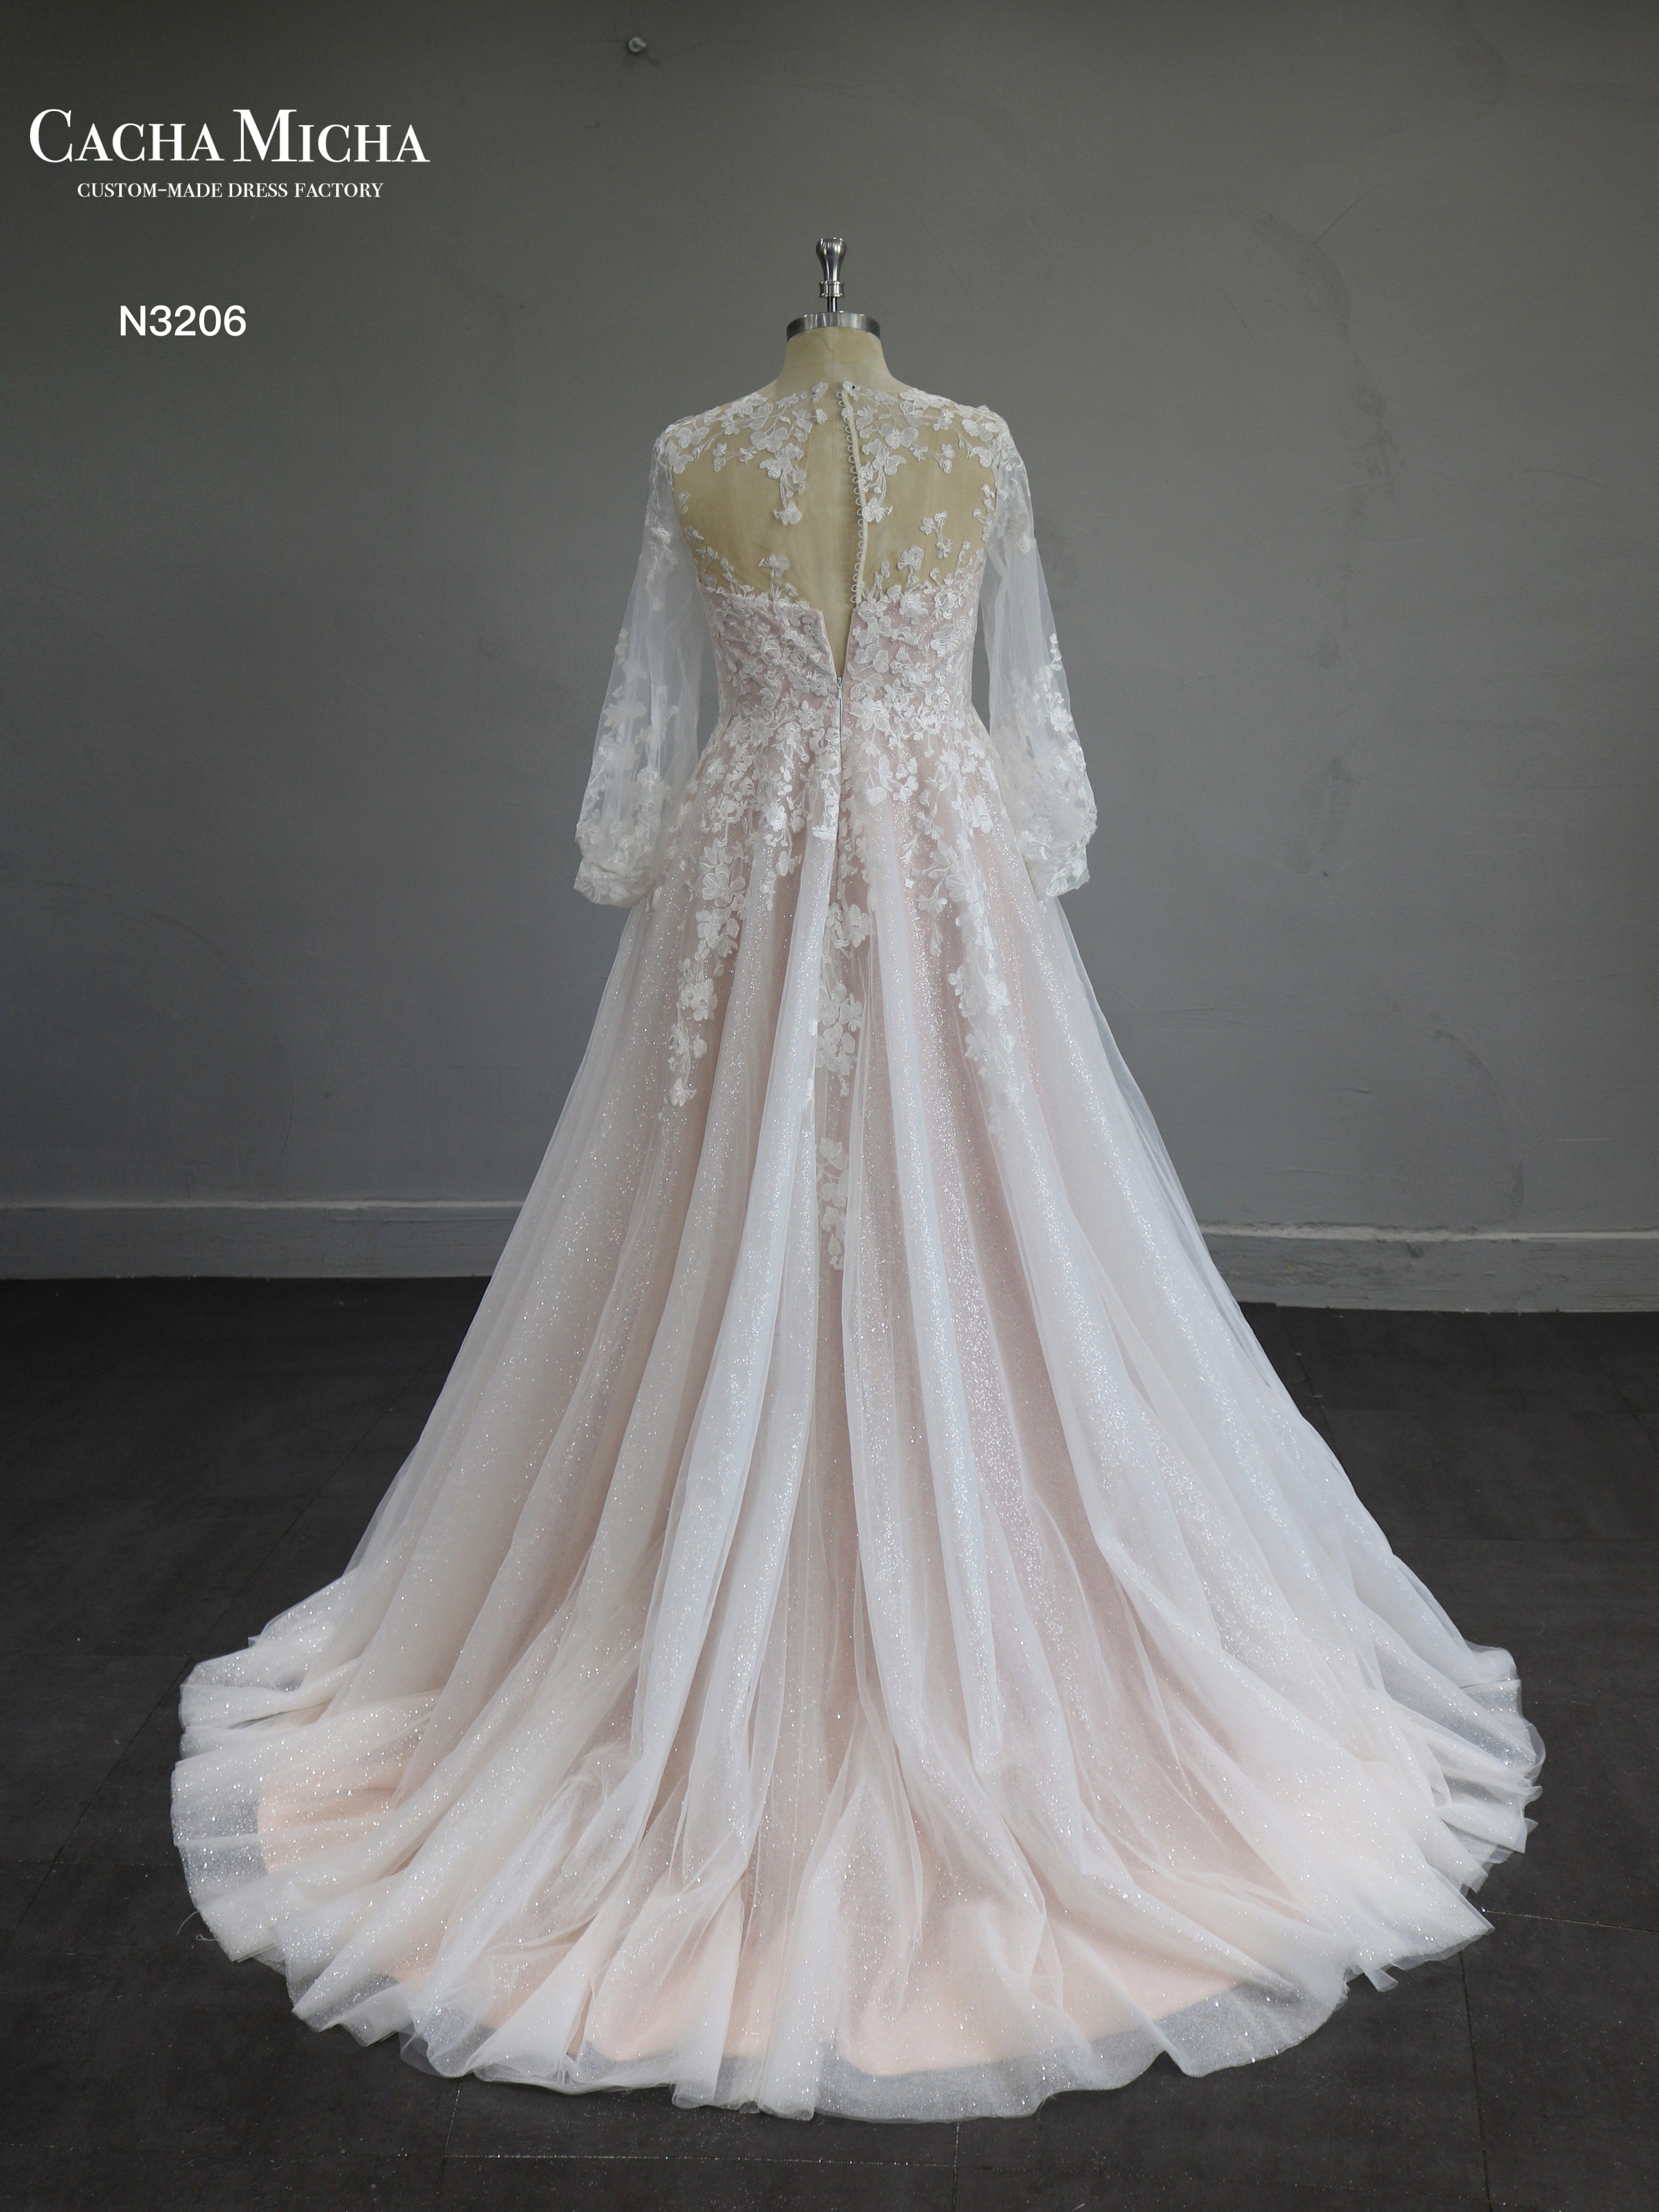 Lace Long Sleeves Blush Lining Wedding Dress With Cape N3206